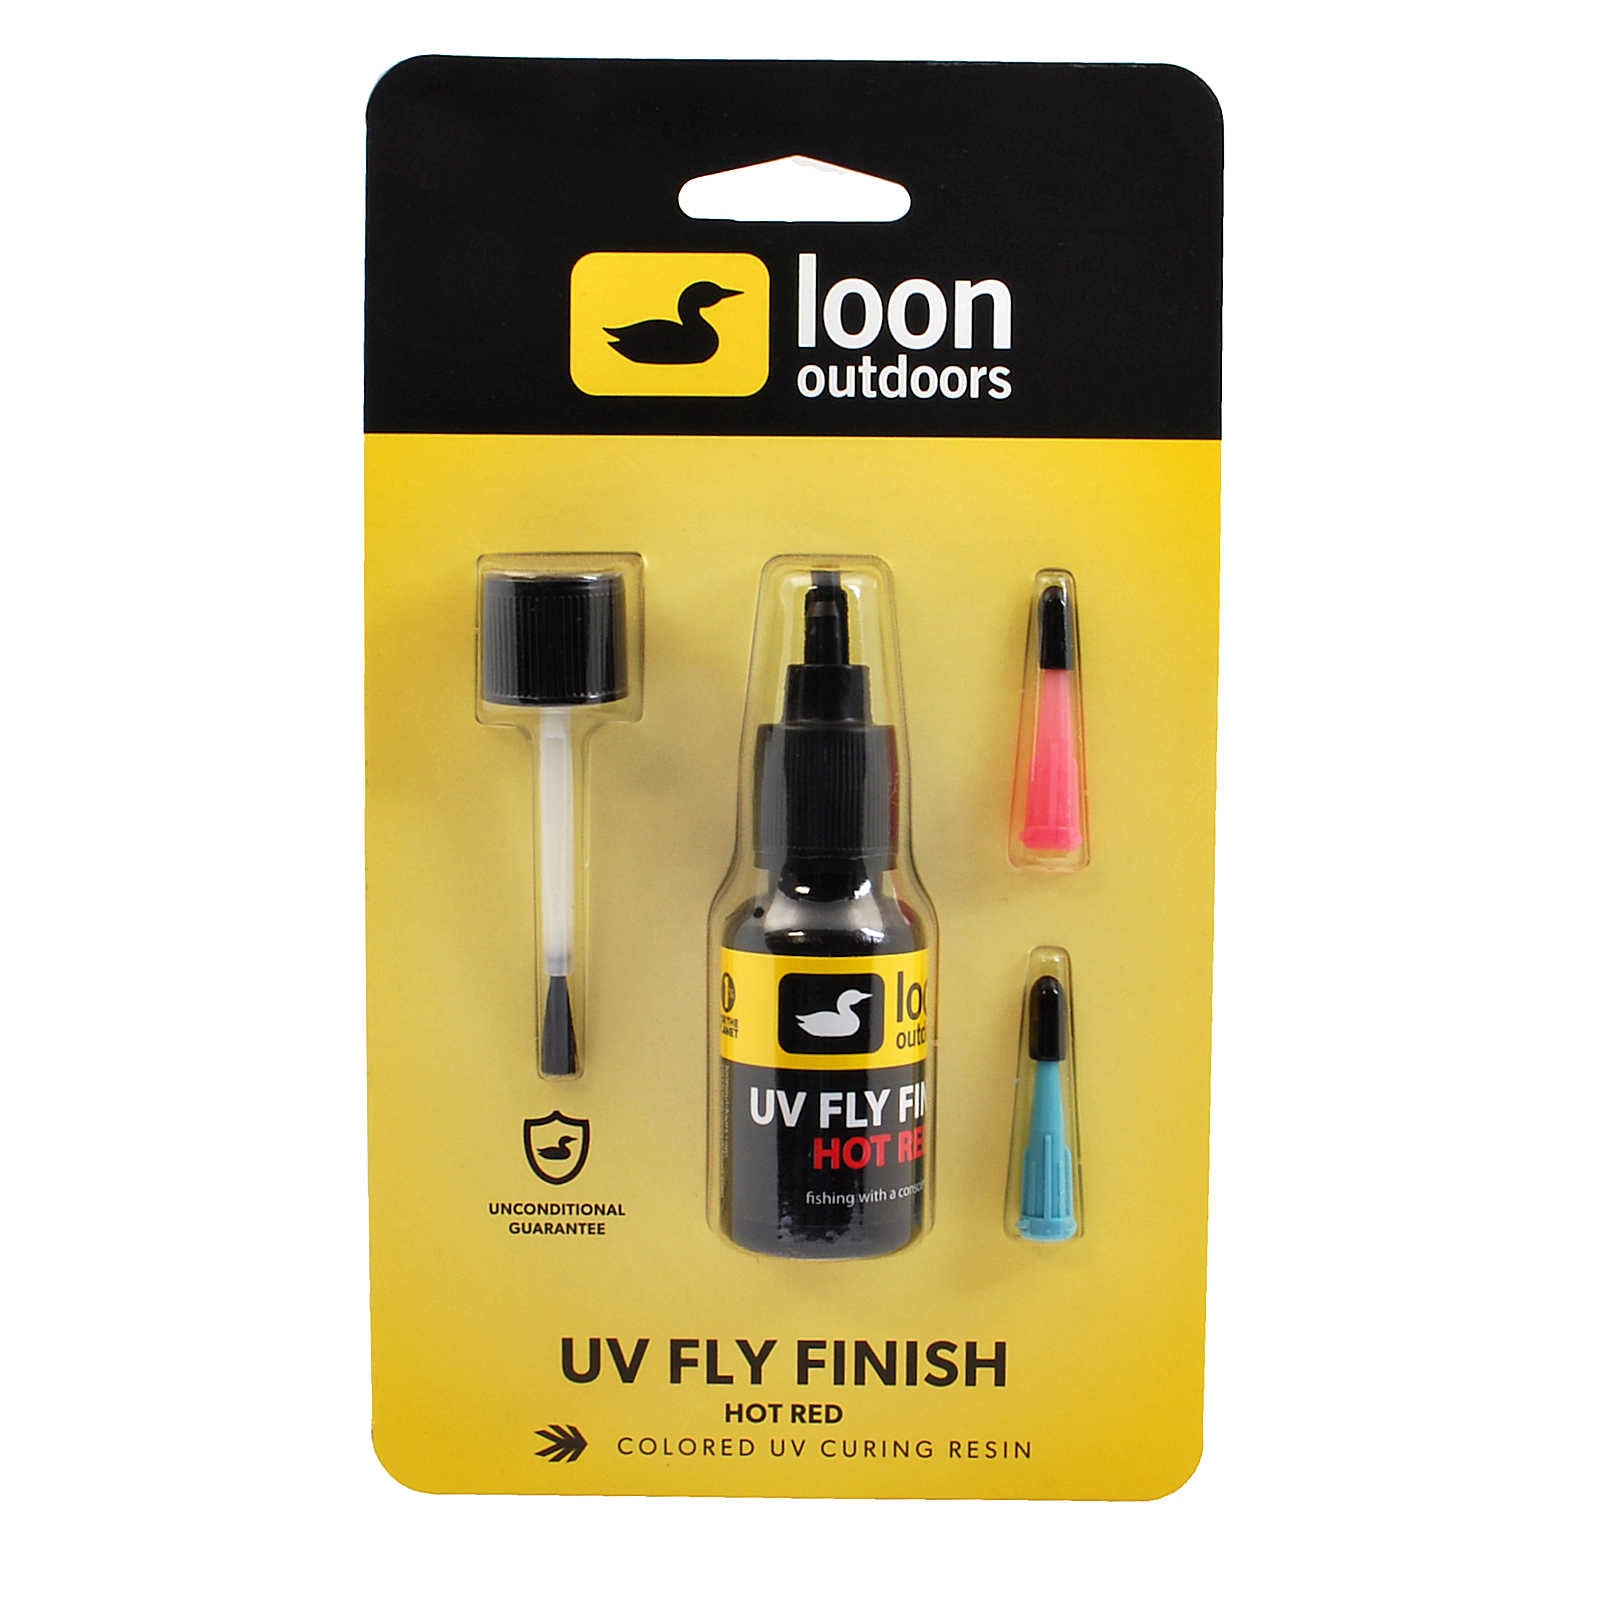 Loon UV Bench Light  Pacific Fly Fishers